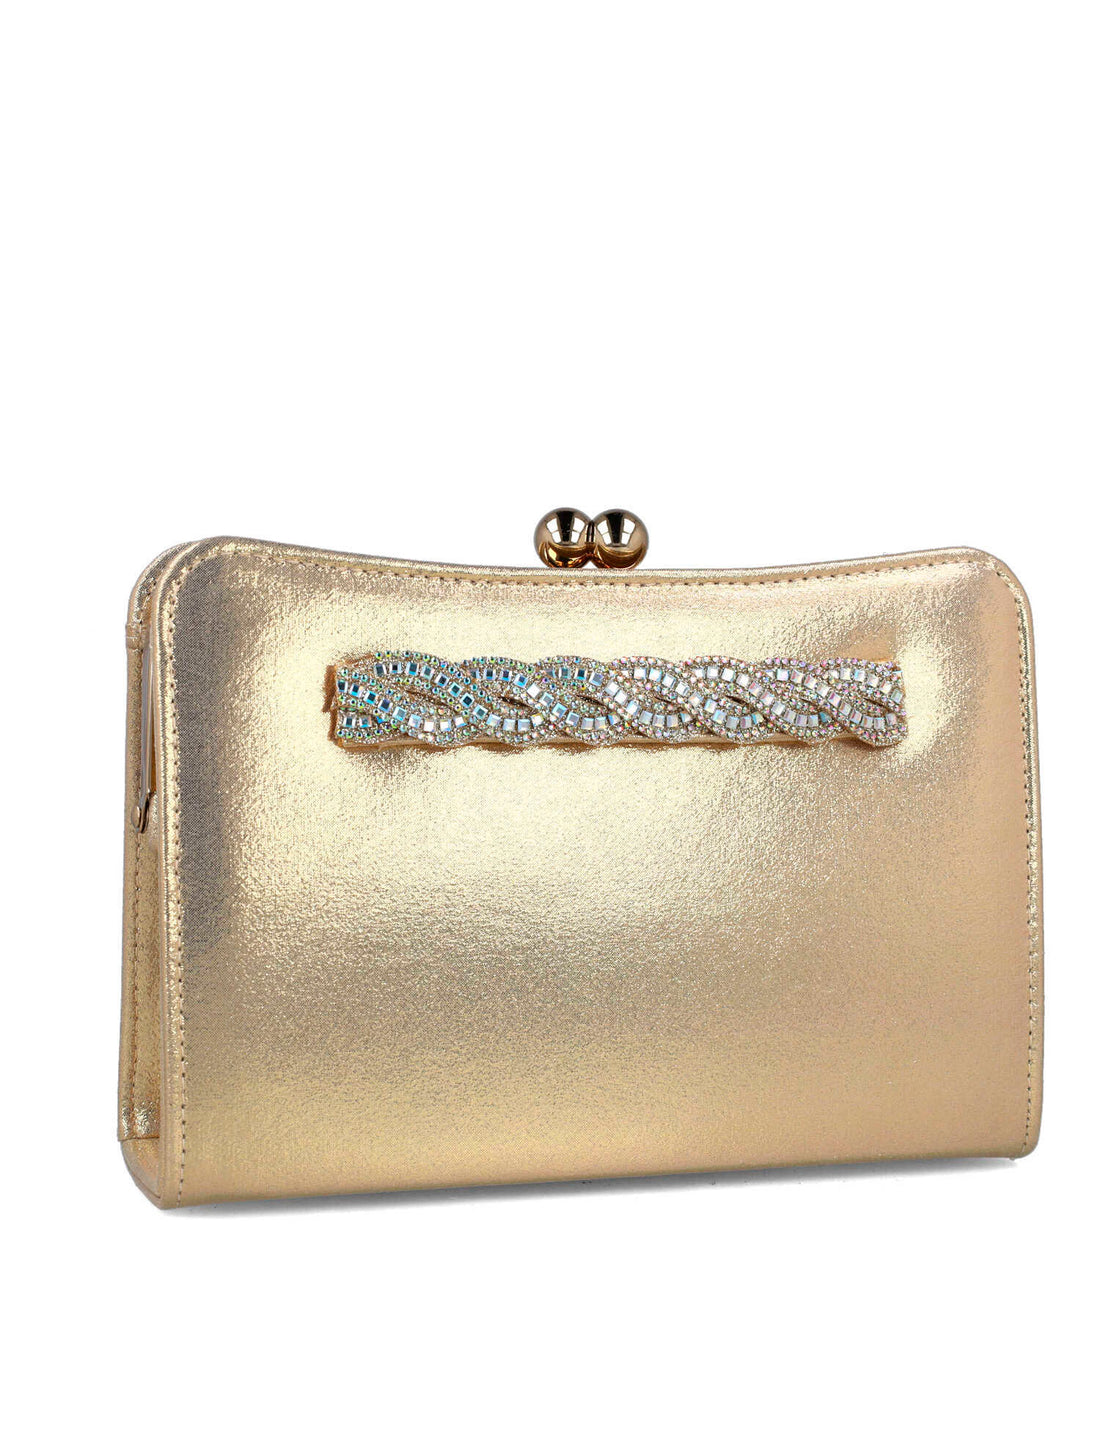 Gold Clutch With Embellished Hand Strap_85490_00_02